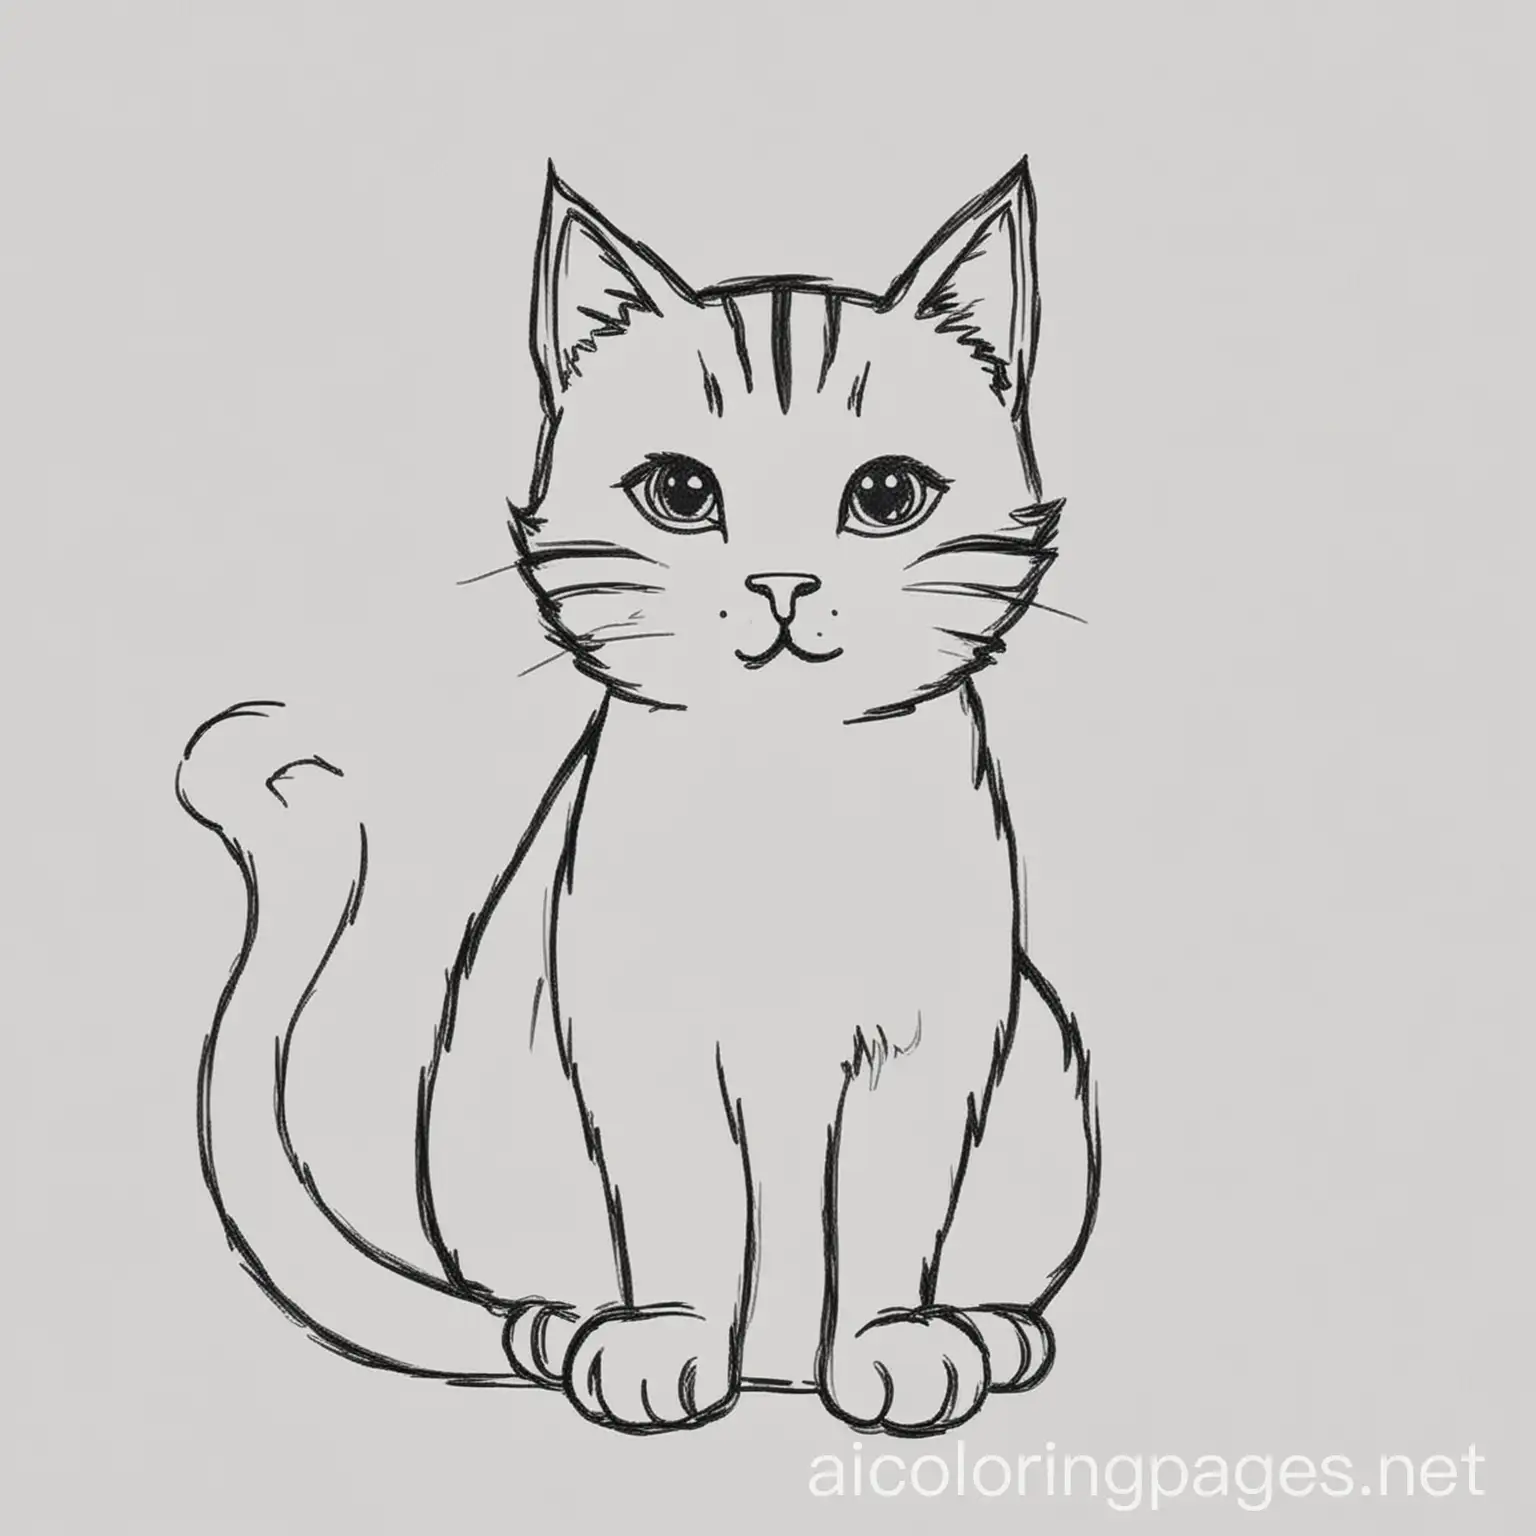 cat coloring page, Coloring Page, black and white, line art, white background, Simplicity, Ample White Space. The background of the coloring page is plain white to make it easy for young children to color within the lines. The outlines of all the subjects are easy to distinguish, making it simple for kids to color without too much difficulty